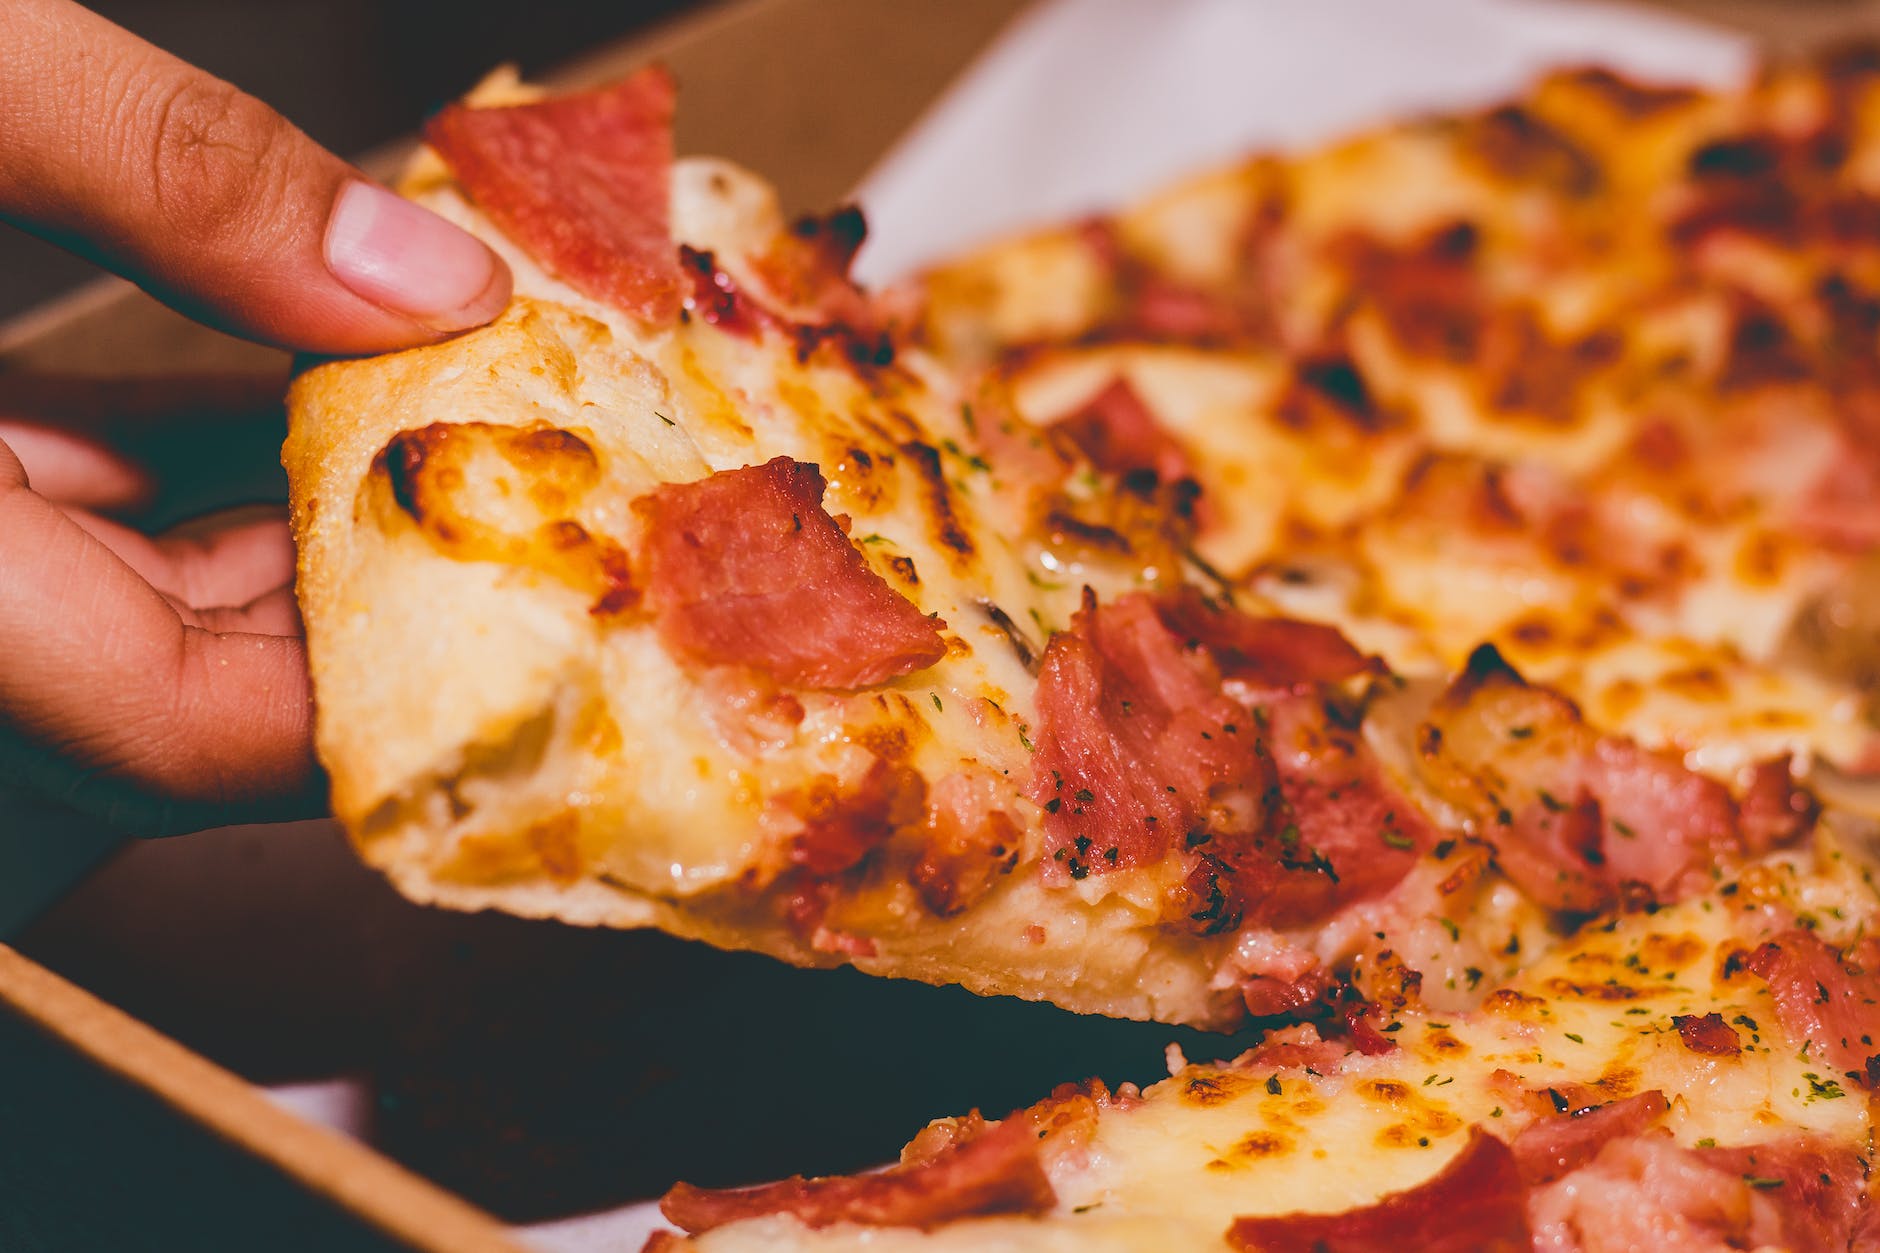 close up photo of person holding pizza